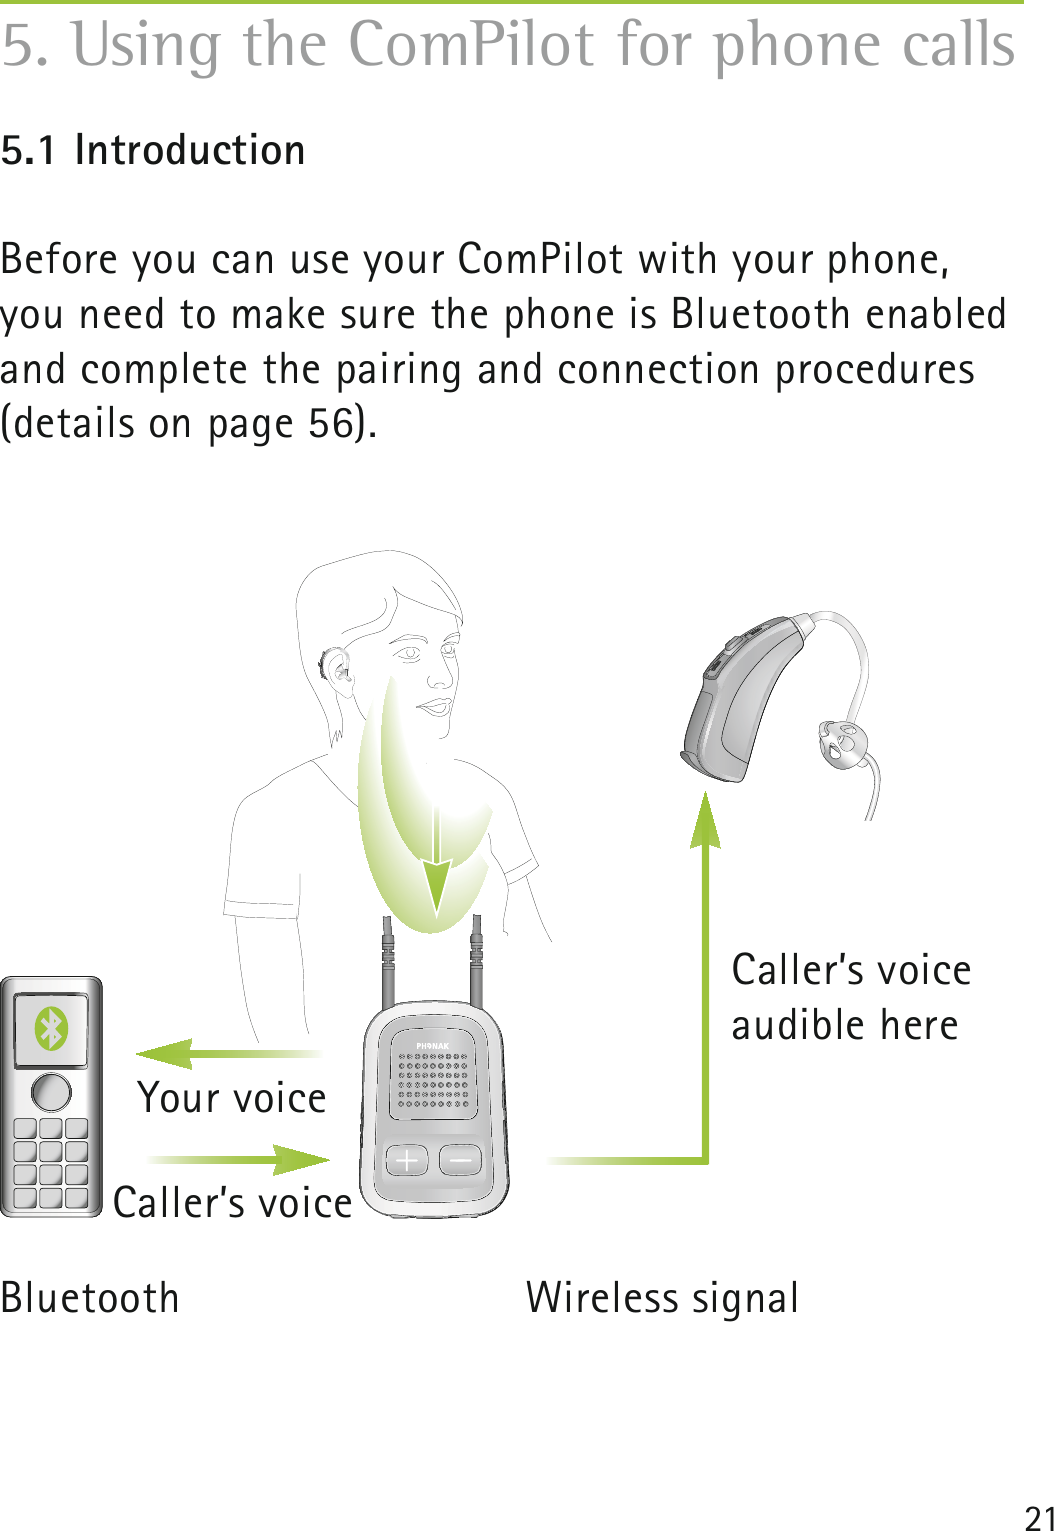 215. Using the ComPilot for phone calls5.1 IntroductionBefore you can use your ComPilot with your phone, you need to make sure the phone is Bluetooth enabled and complete the pairing and connection procedures (details on page 56). Your voice Caller’s voice Bluetooth Wireless signalCaller’s voiceaudible here